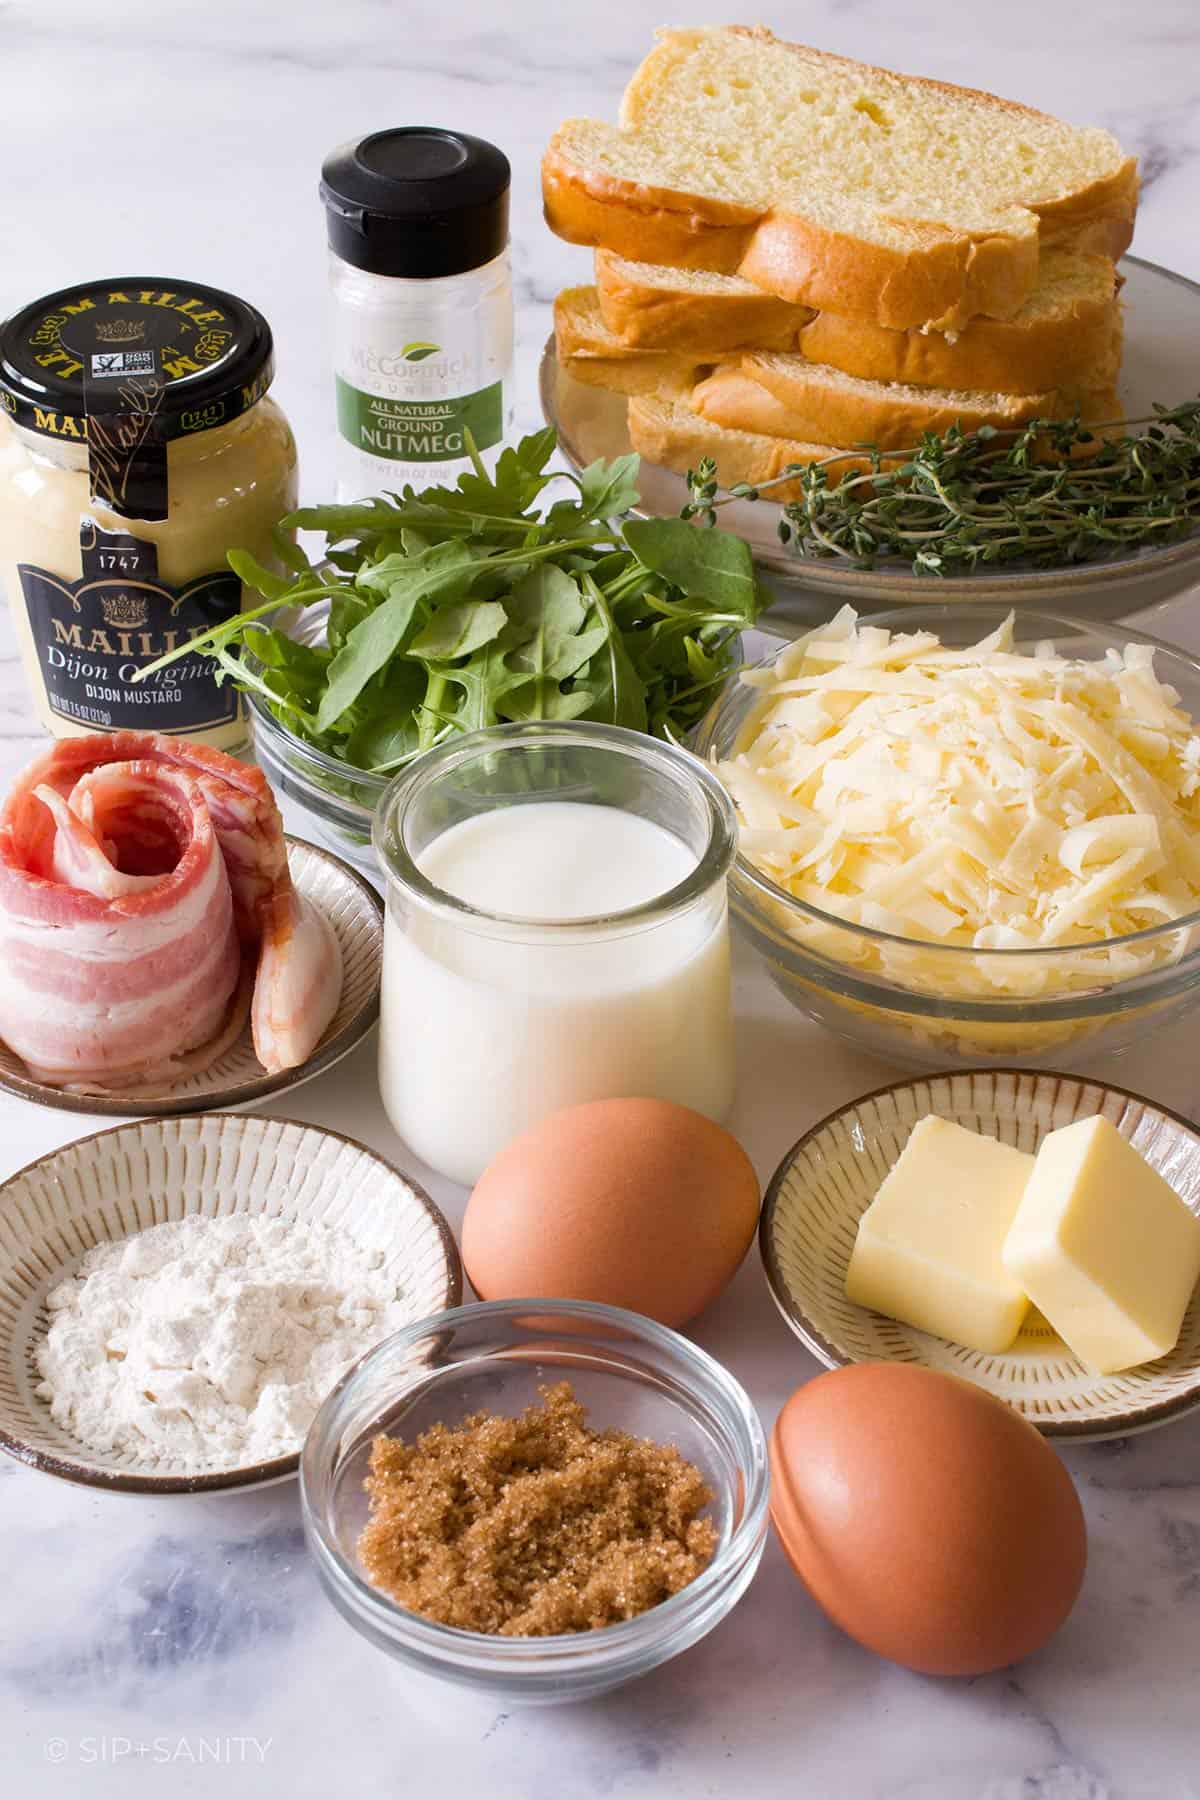 Raw ingredients for a croque madame on a white table.